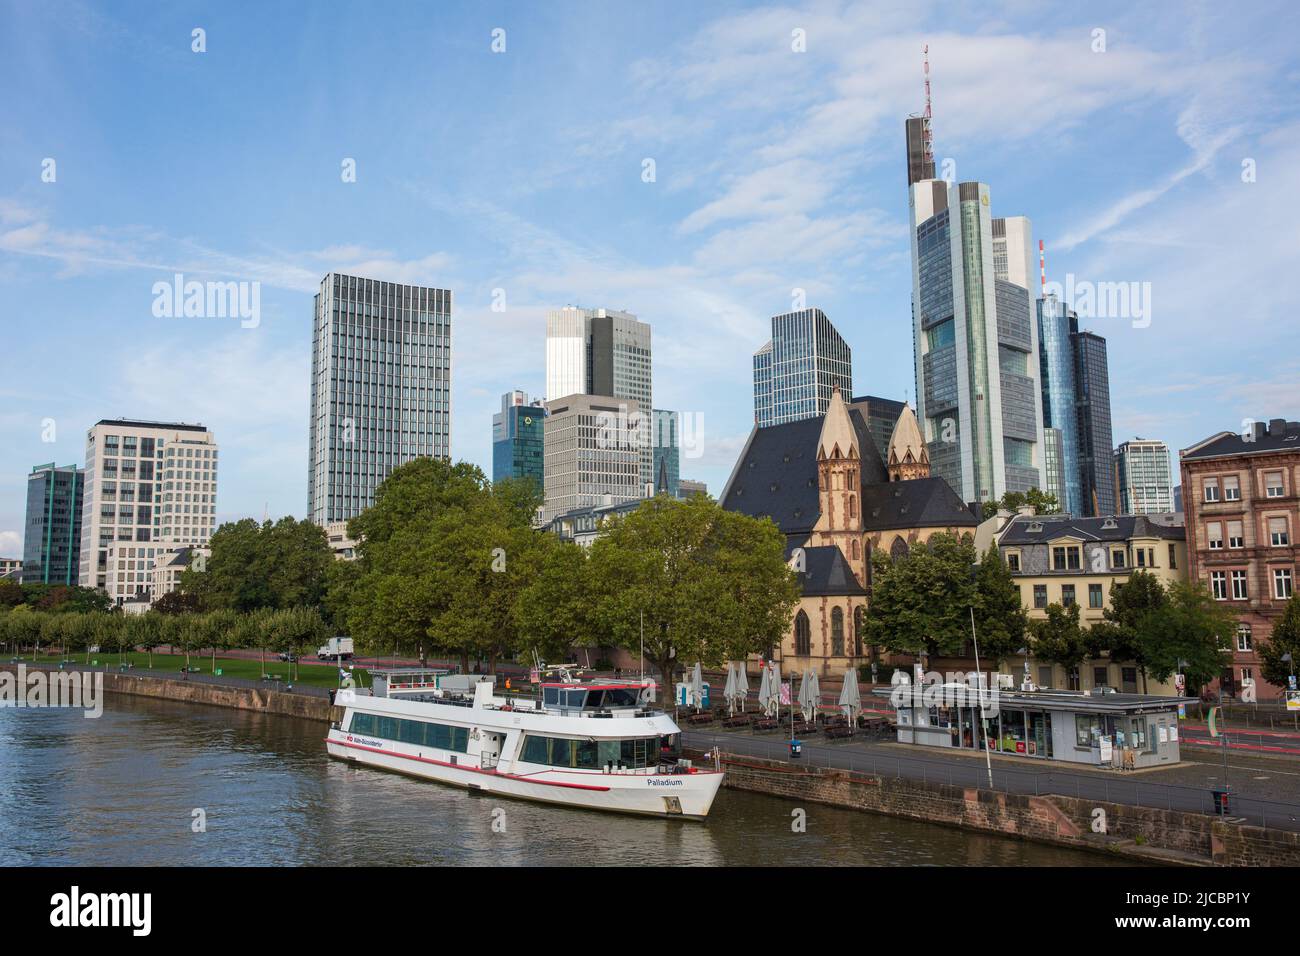 Frankfurt am Main, Germany - Aug 31, 2021: Frankfurt skyline with numerous skyscrapers. In the foreground Main river. Stock Photo